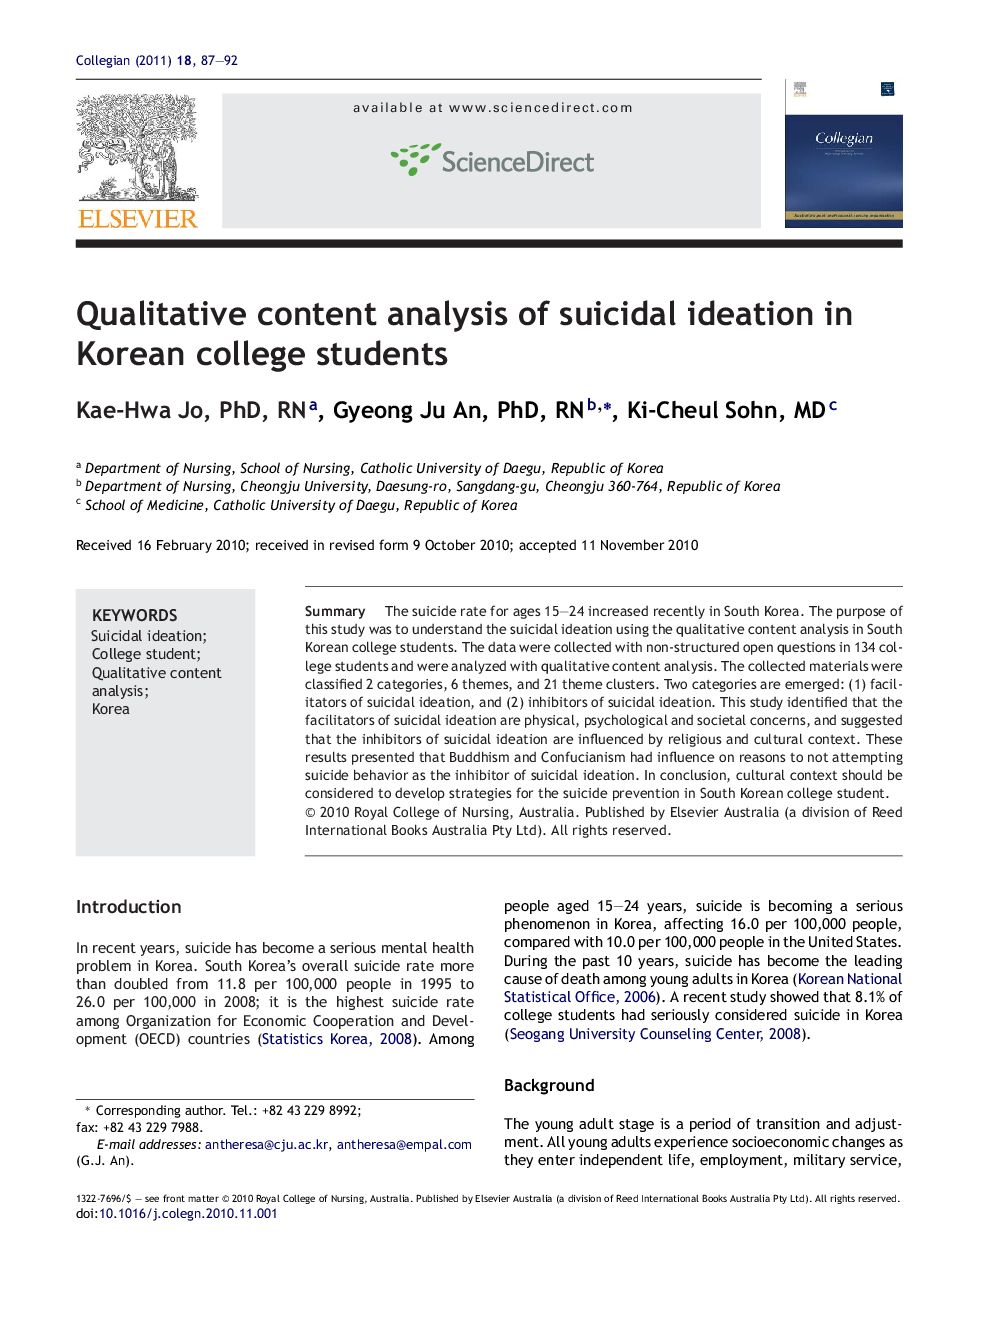 Qualitative content analysis of suicidal ideation in Korean college students